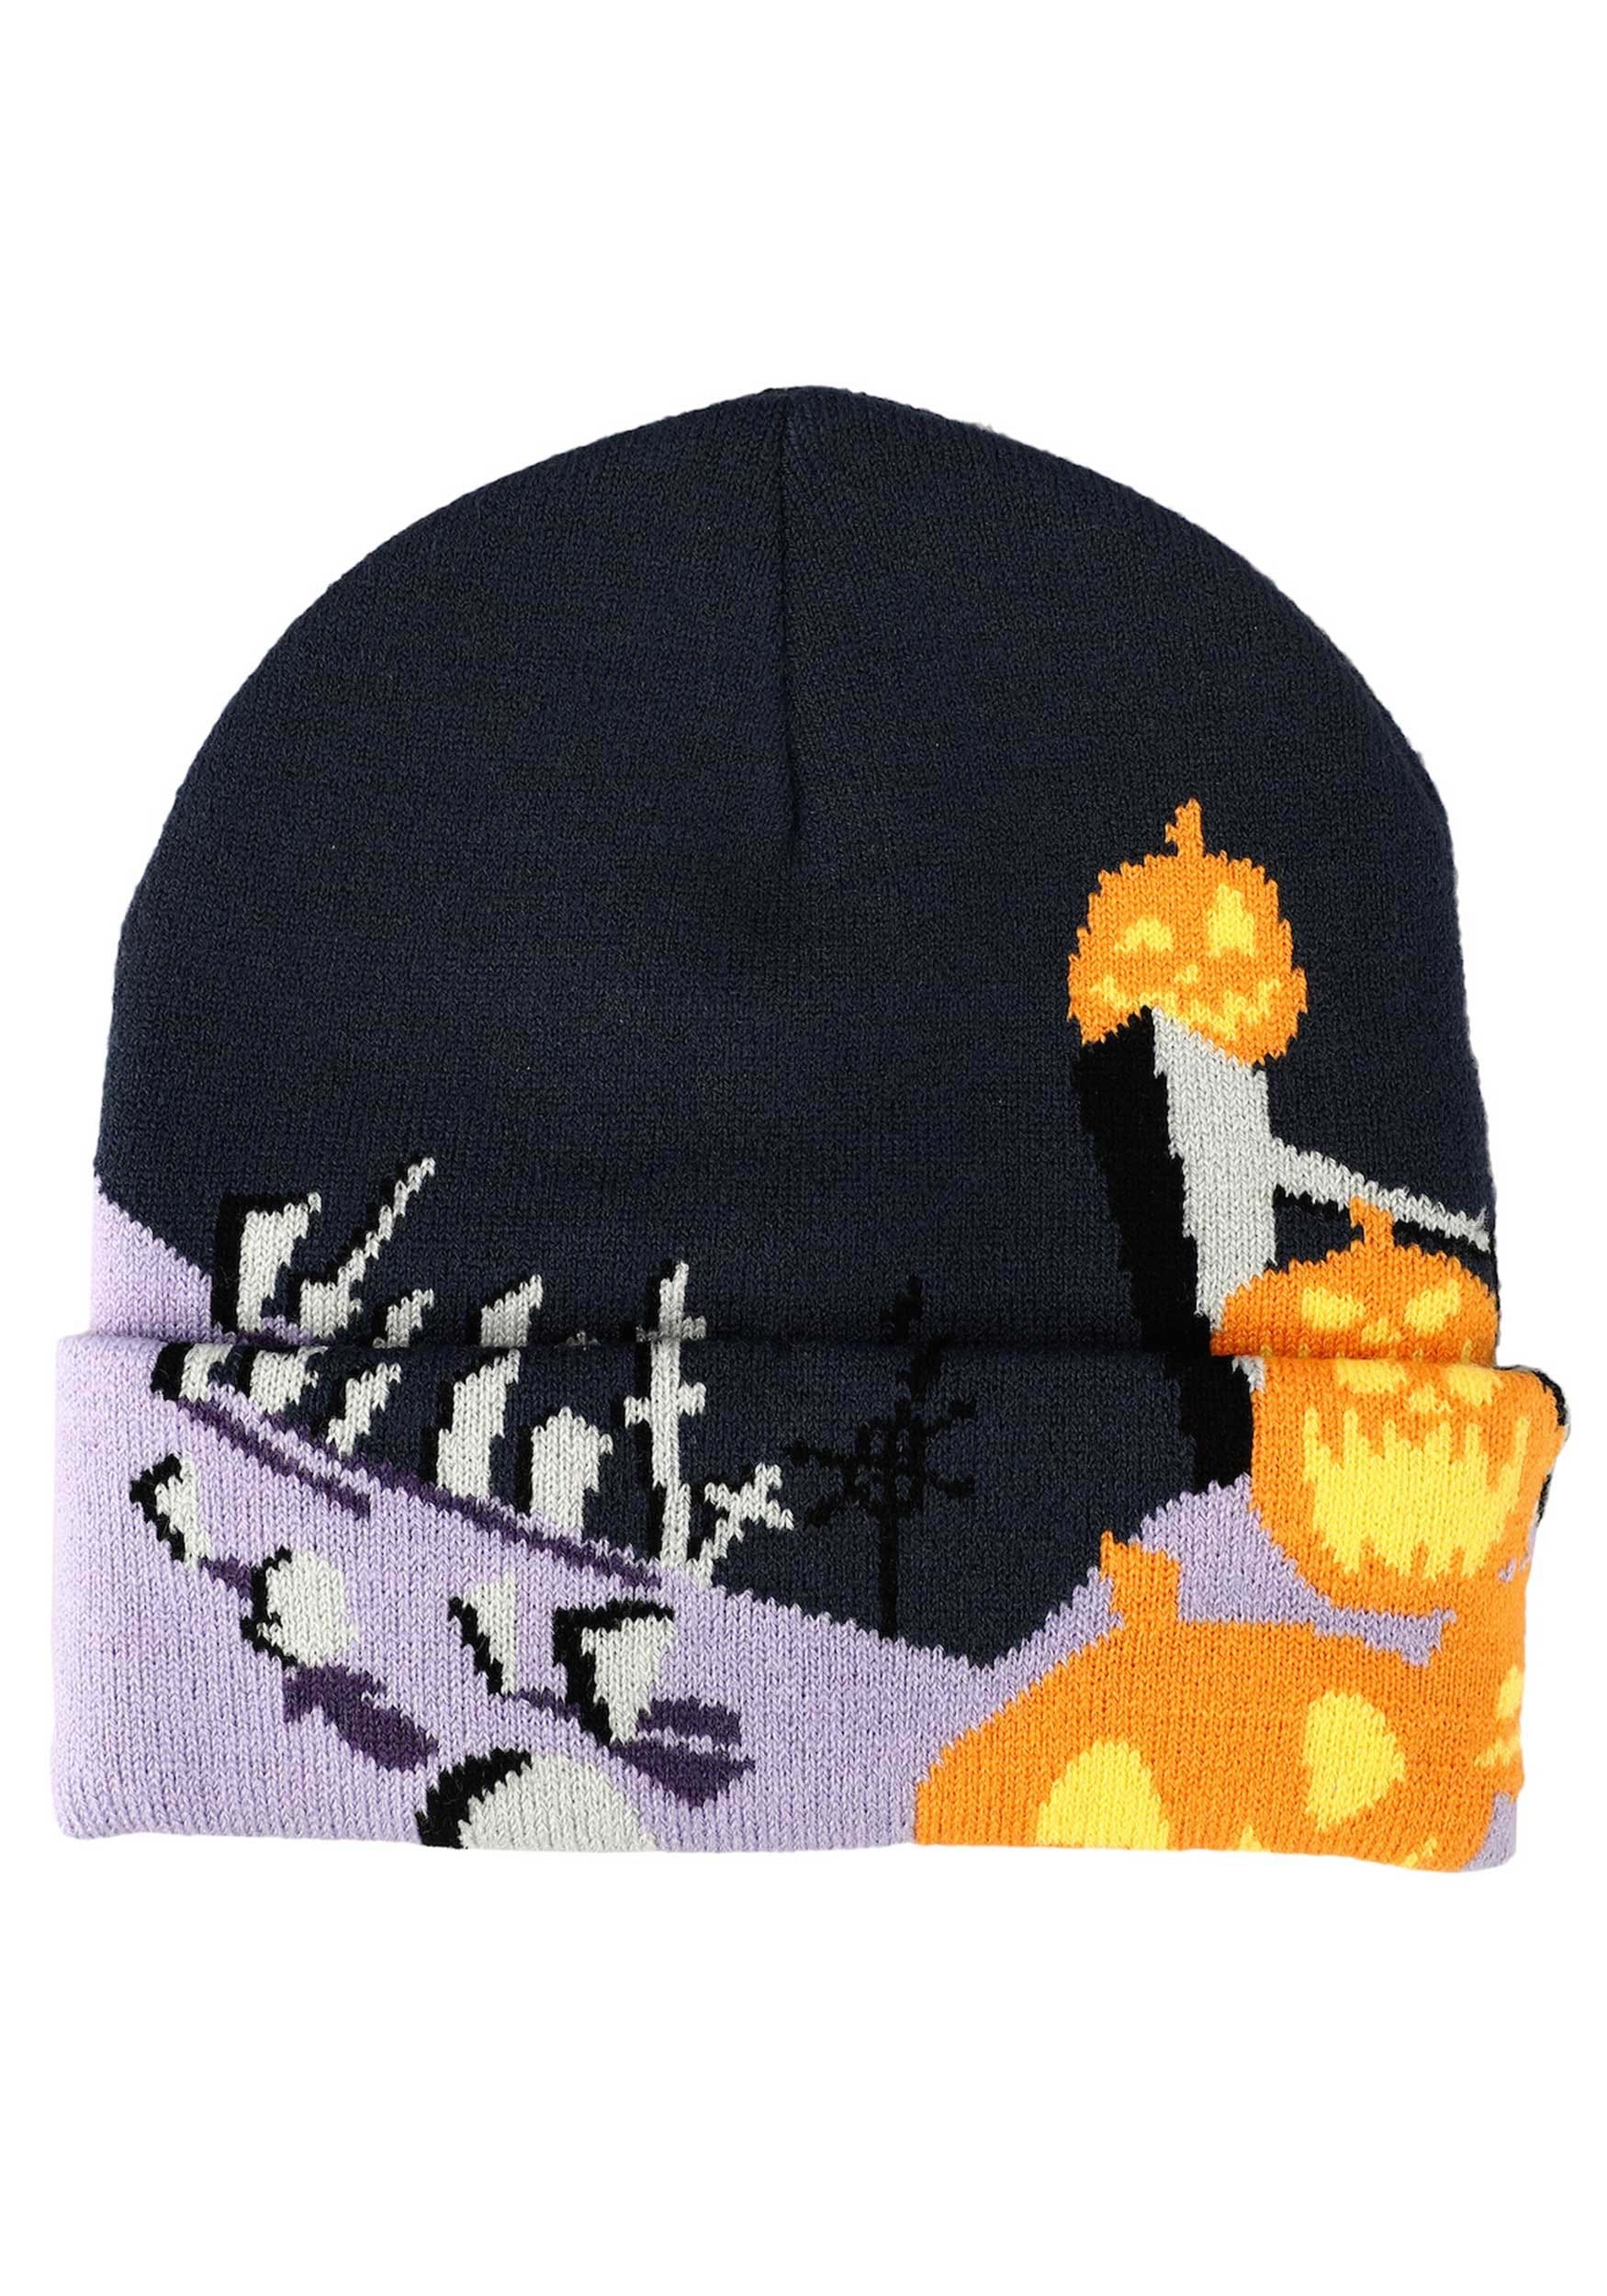 The Nightmare Before Christmas Landscape Beanie